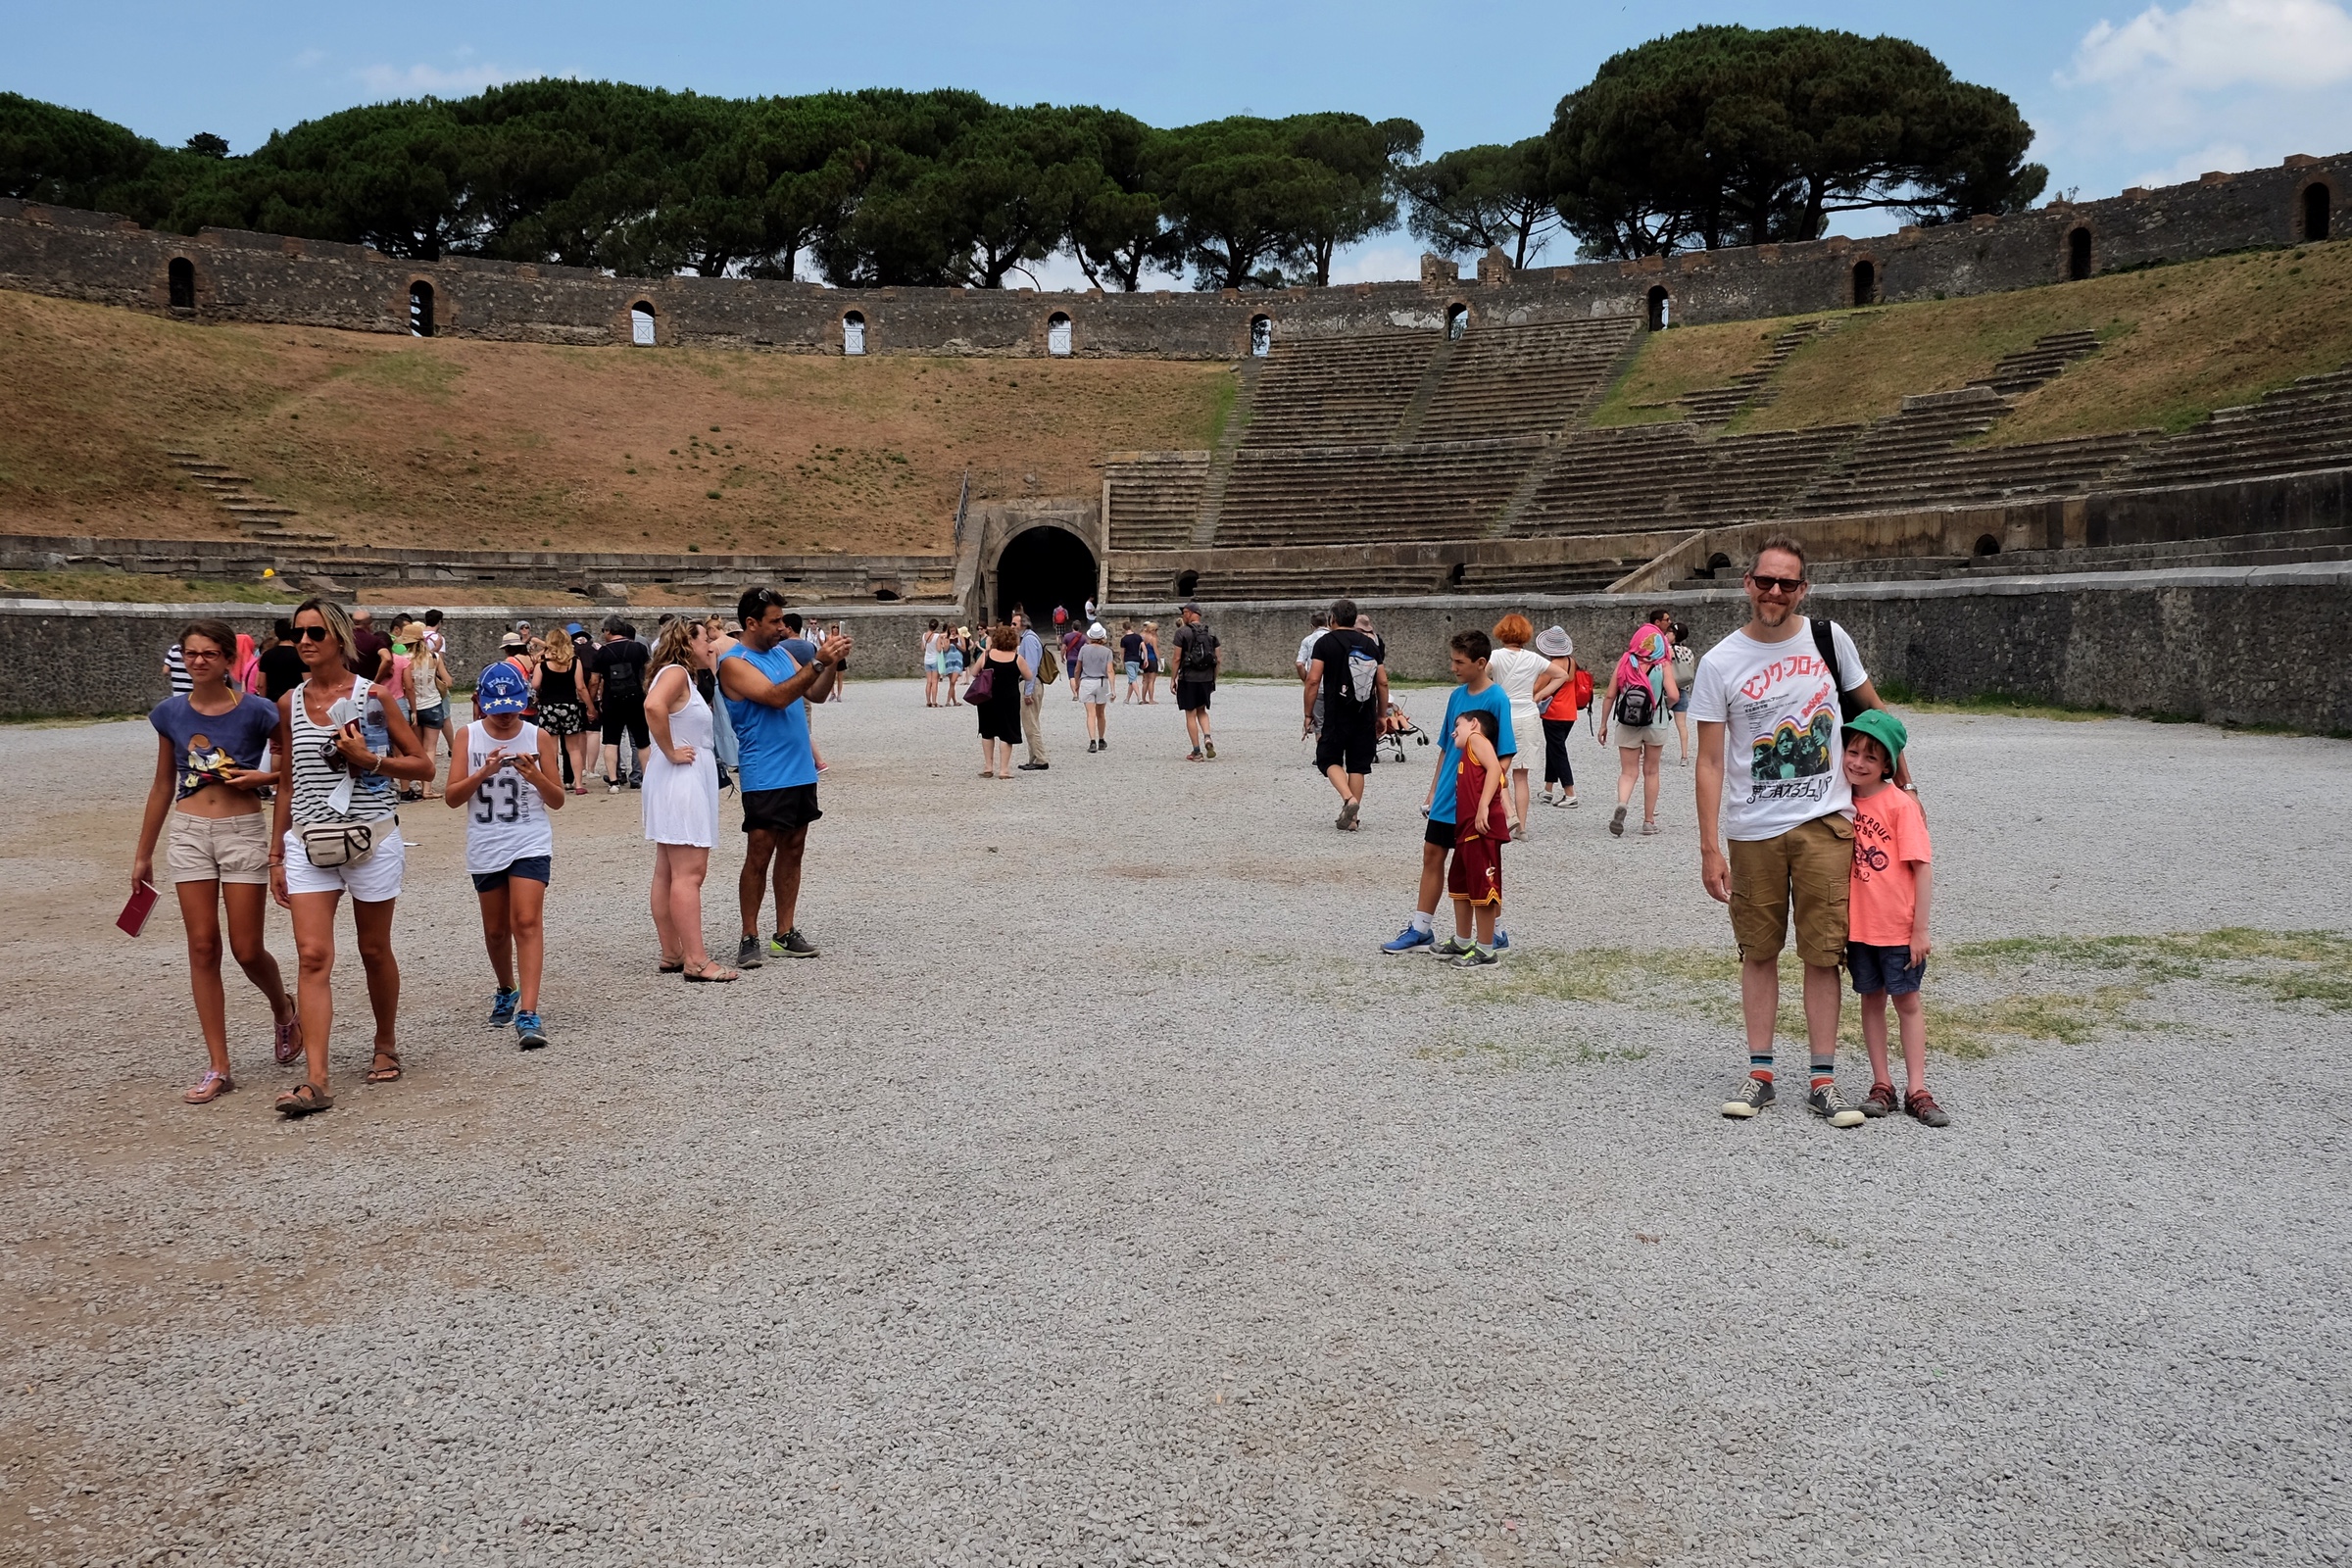 Standing where Pink Floyd played in the Amphitheatre of Pompeii.